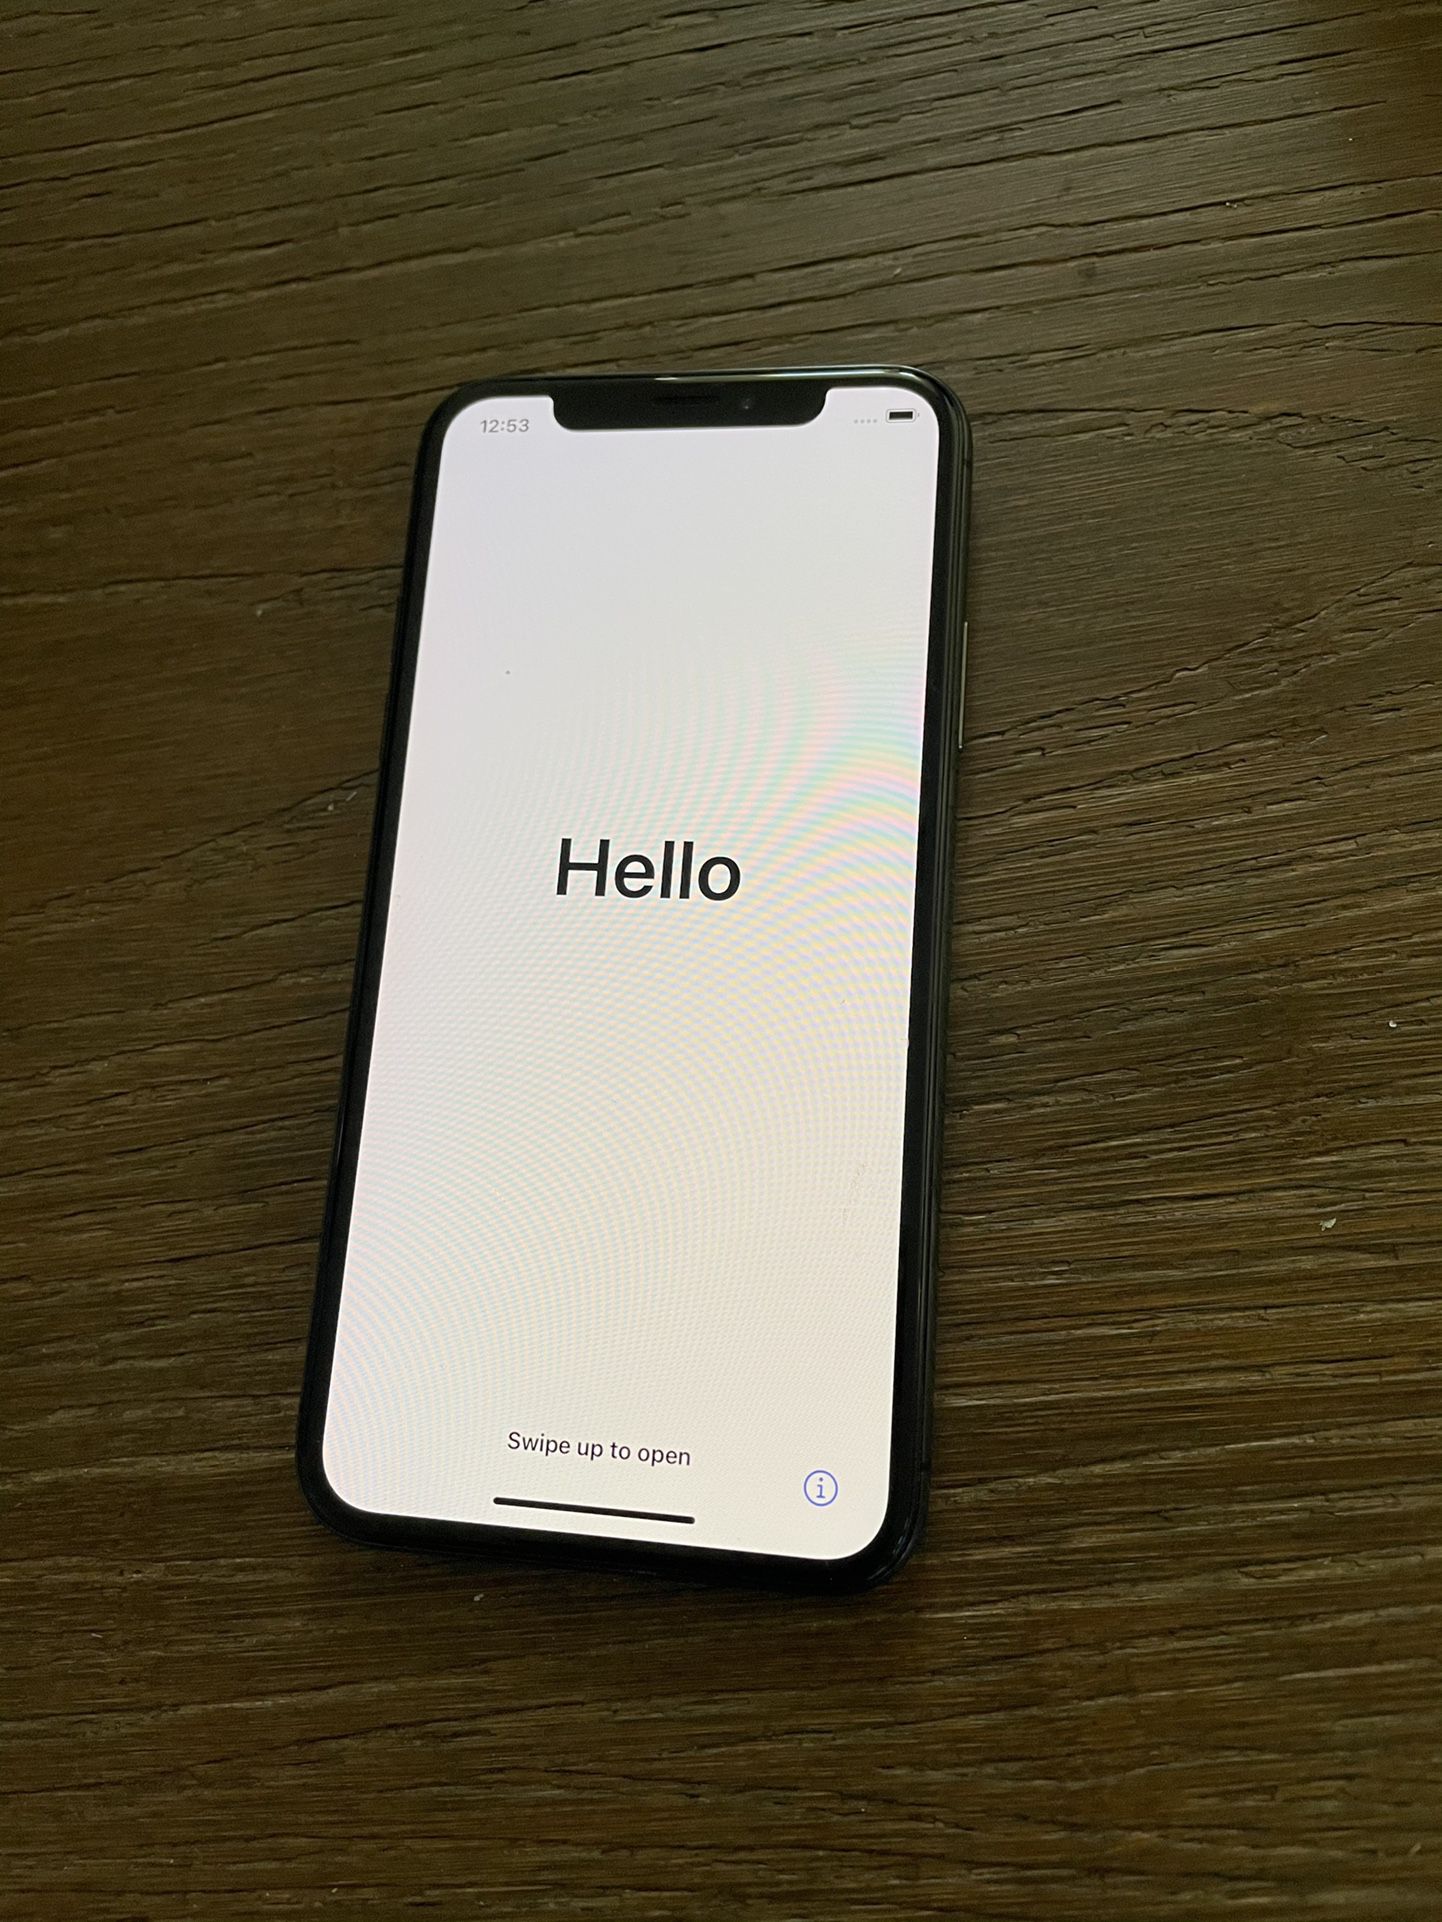 Apple iPhone X 64 GB in Space Gray